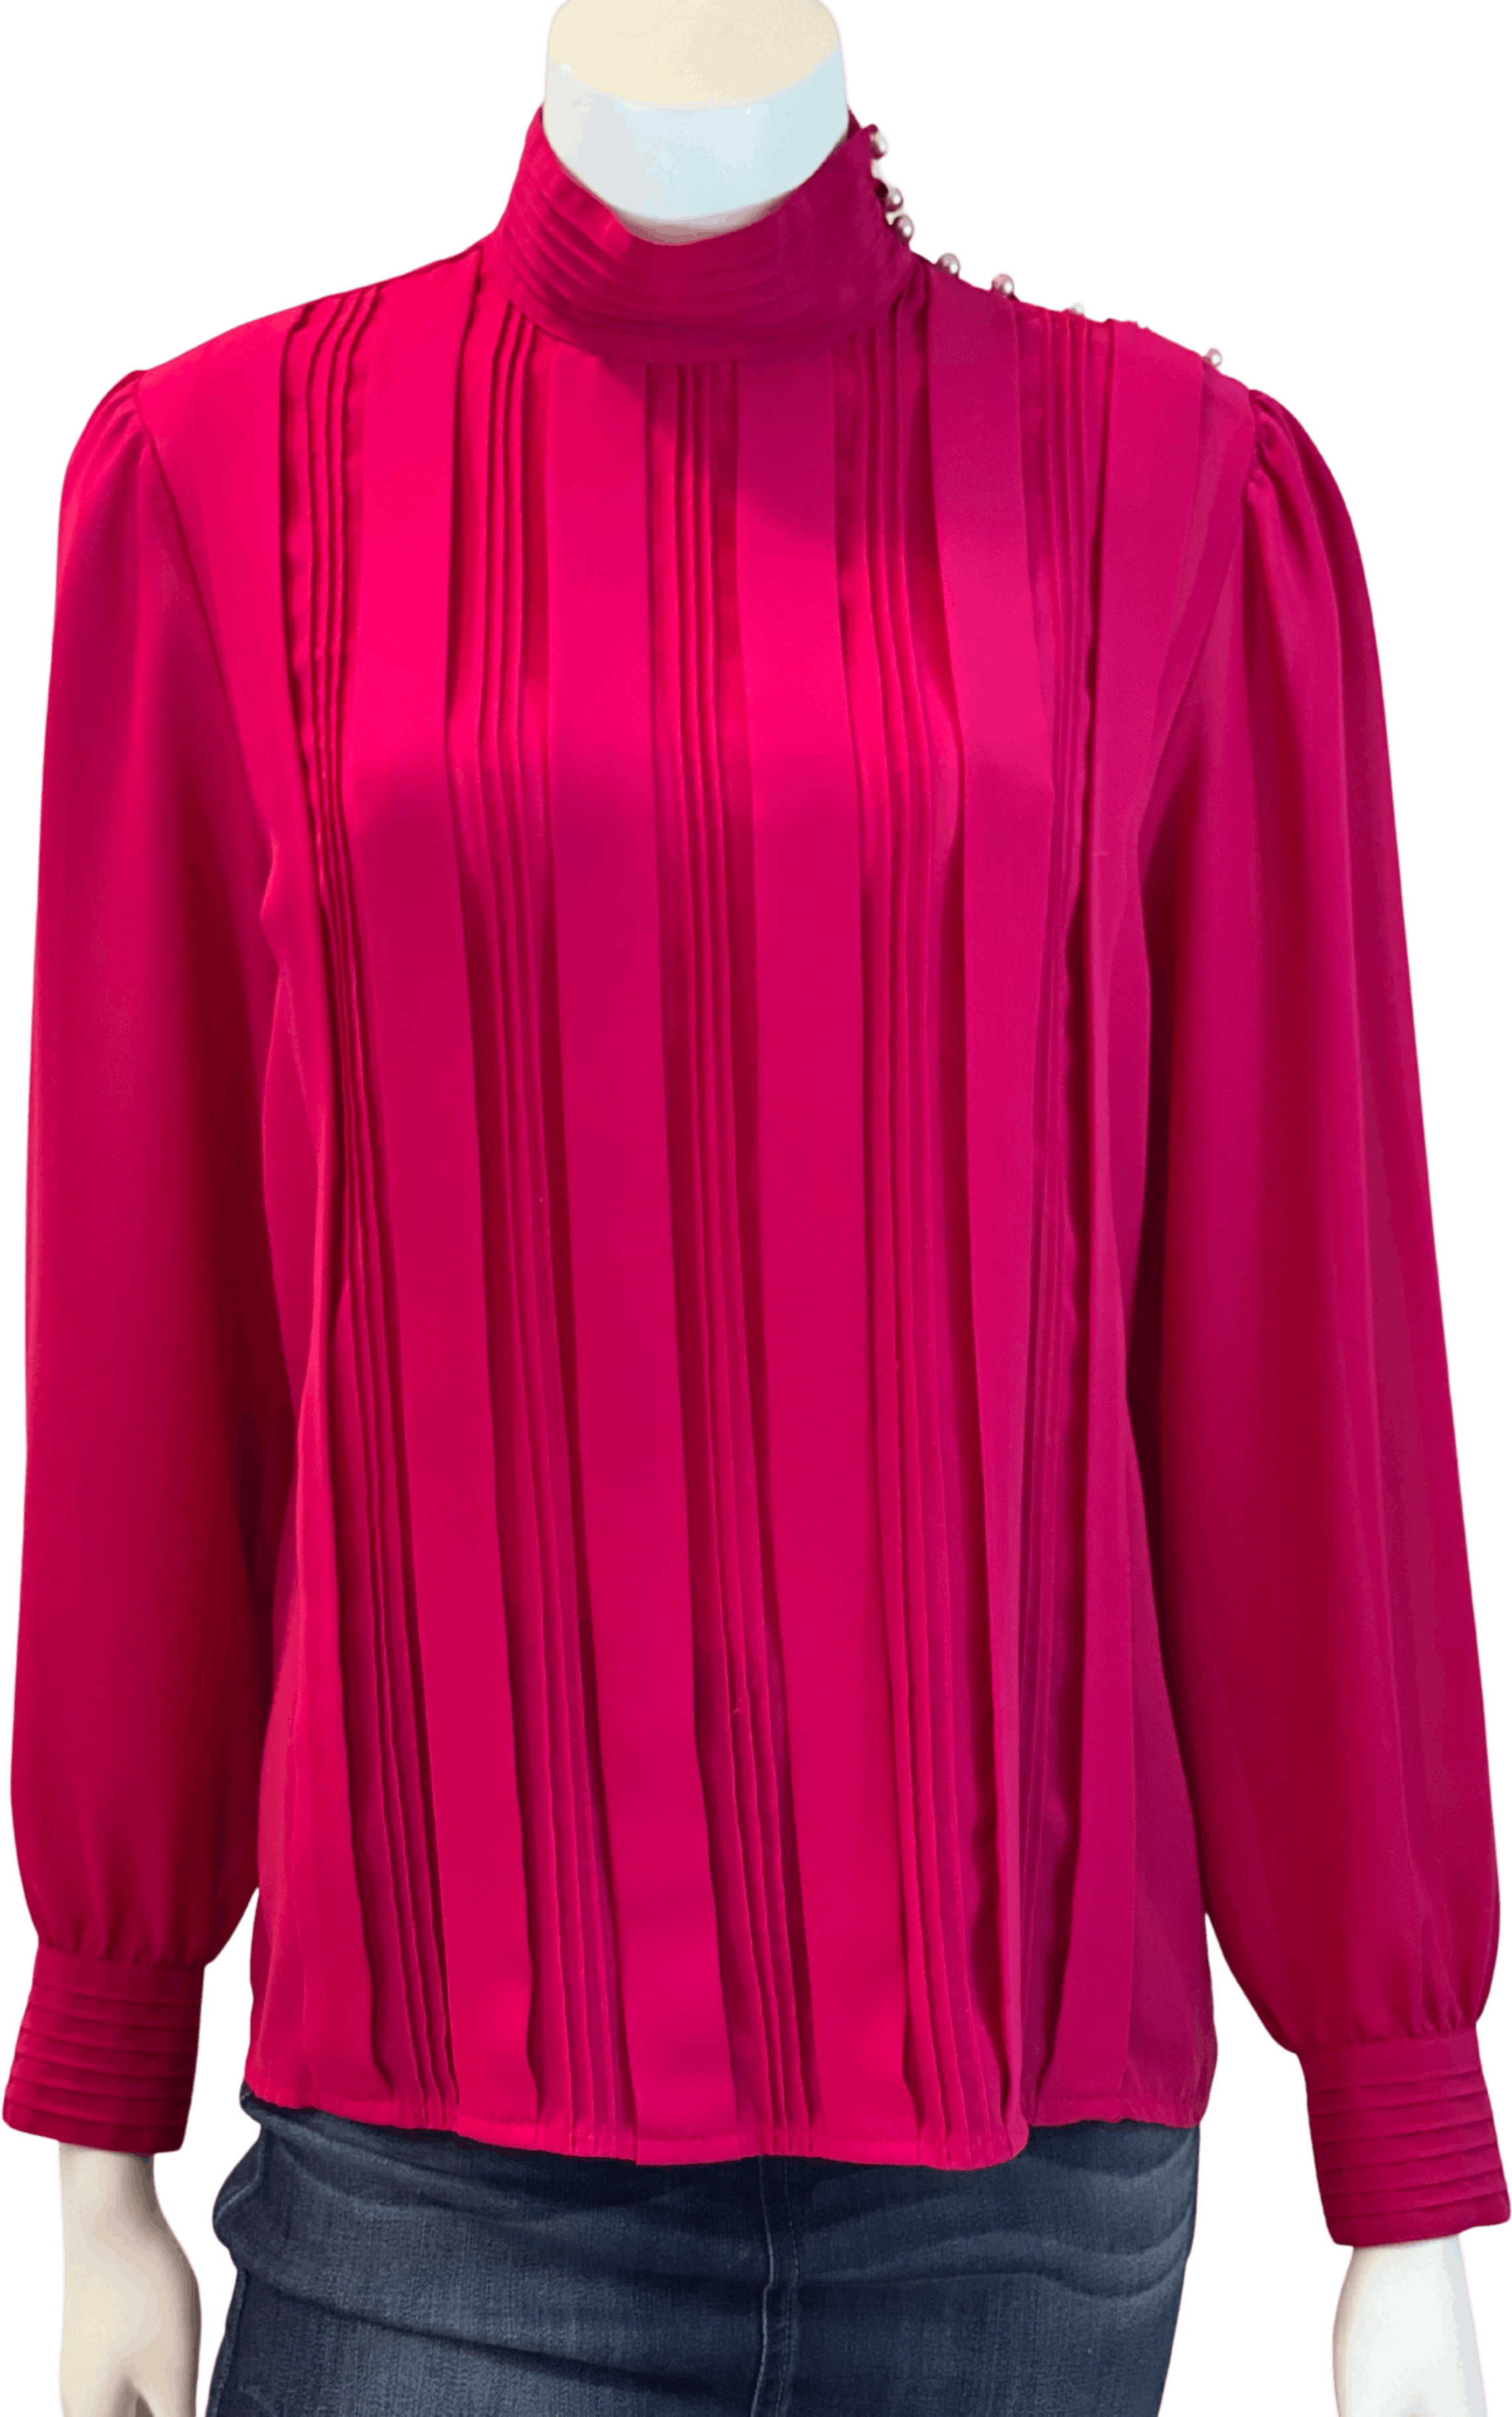 Vintage Fuchsia Pink Blouse with Pearl Buttons by Josephine | Shop ...